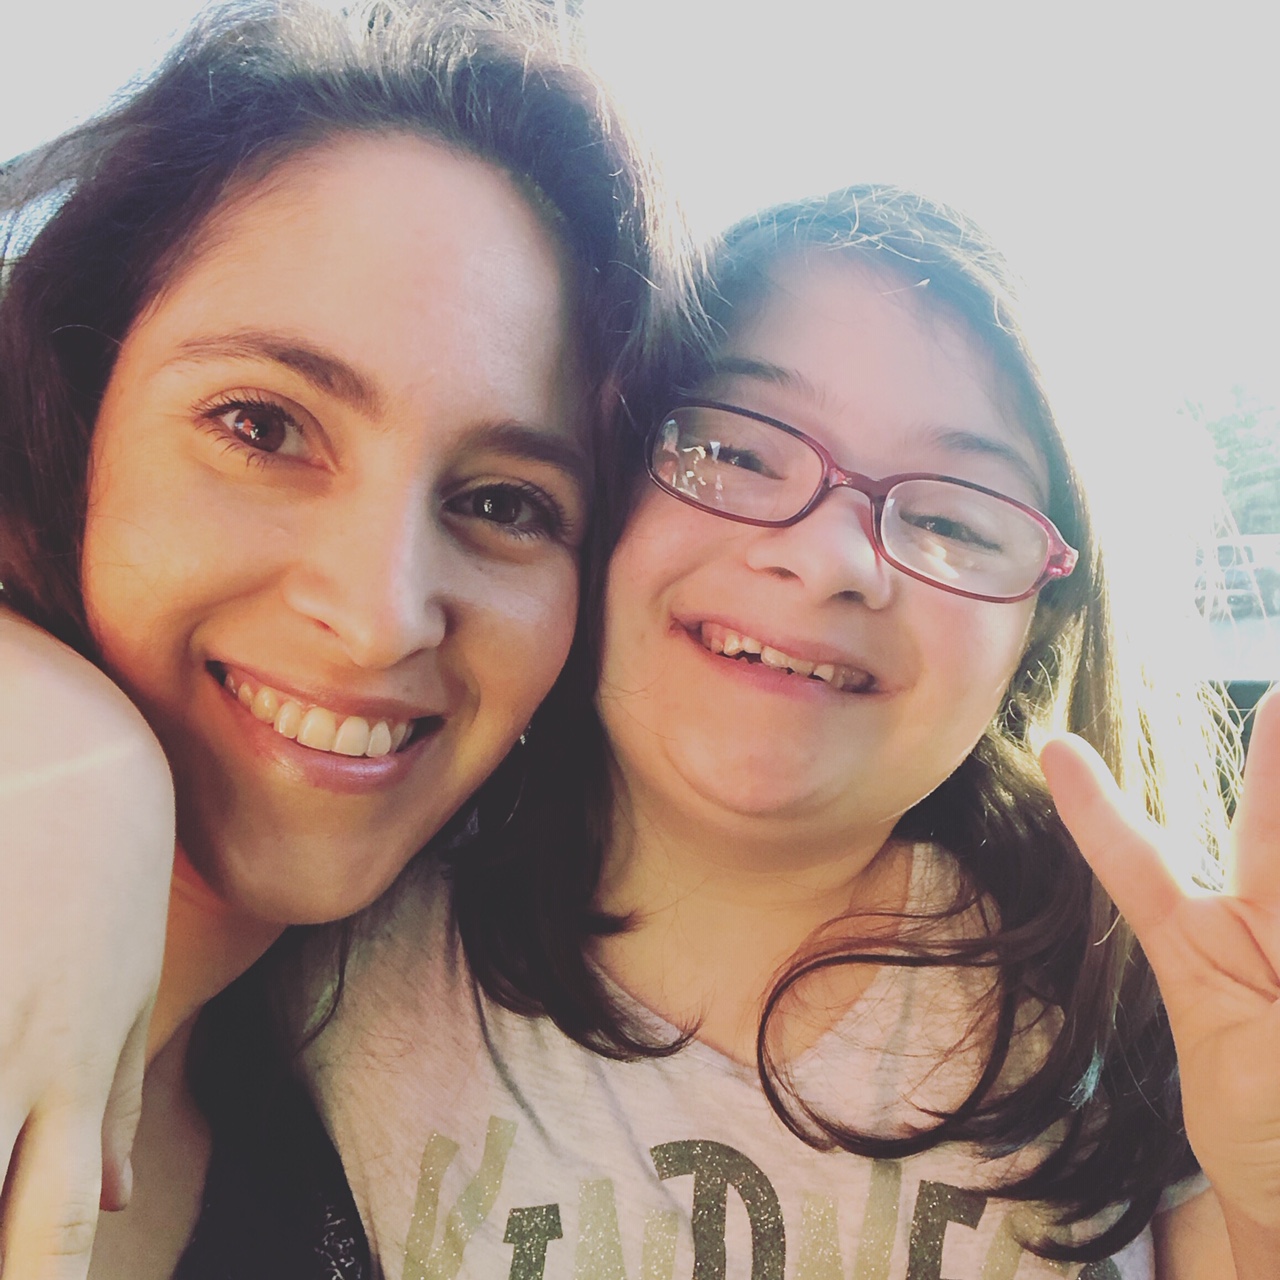 9 Worries I Have as a Parent of a Child With a Disability